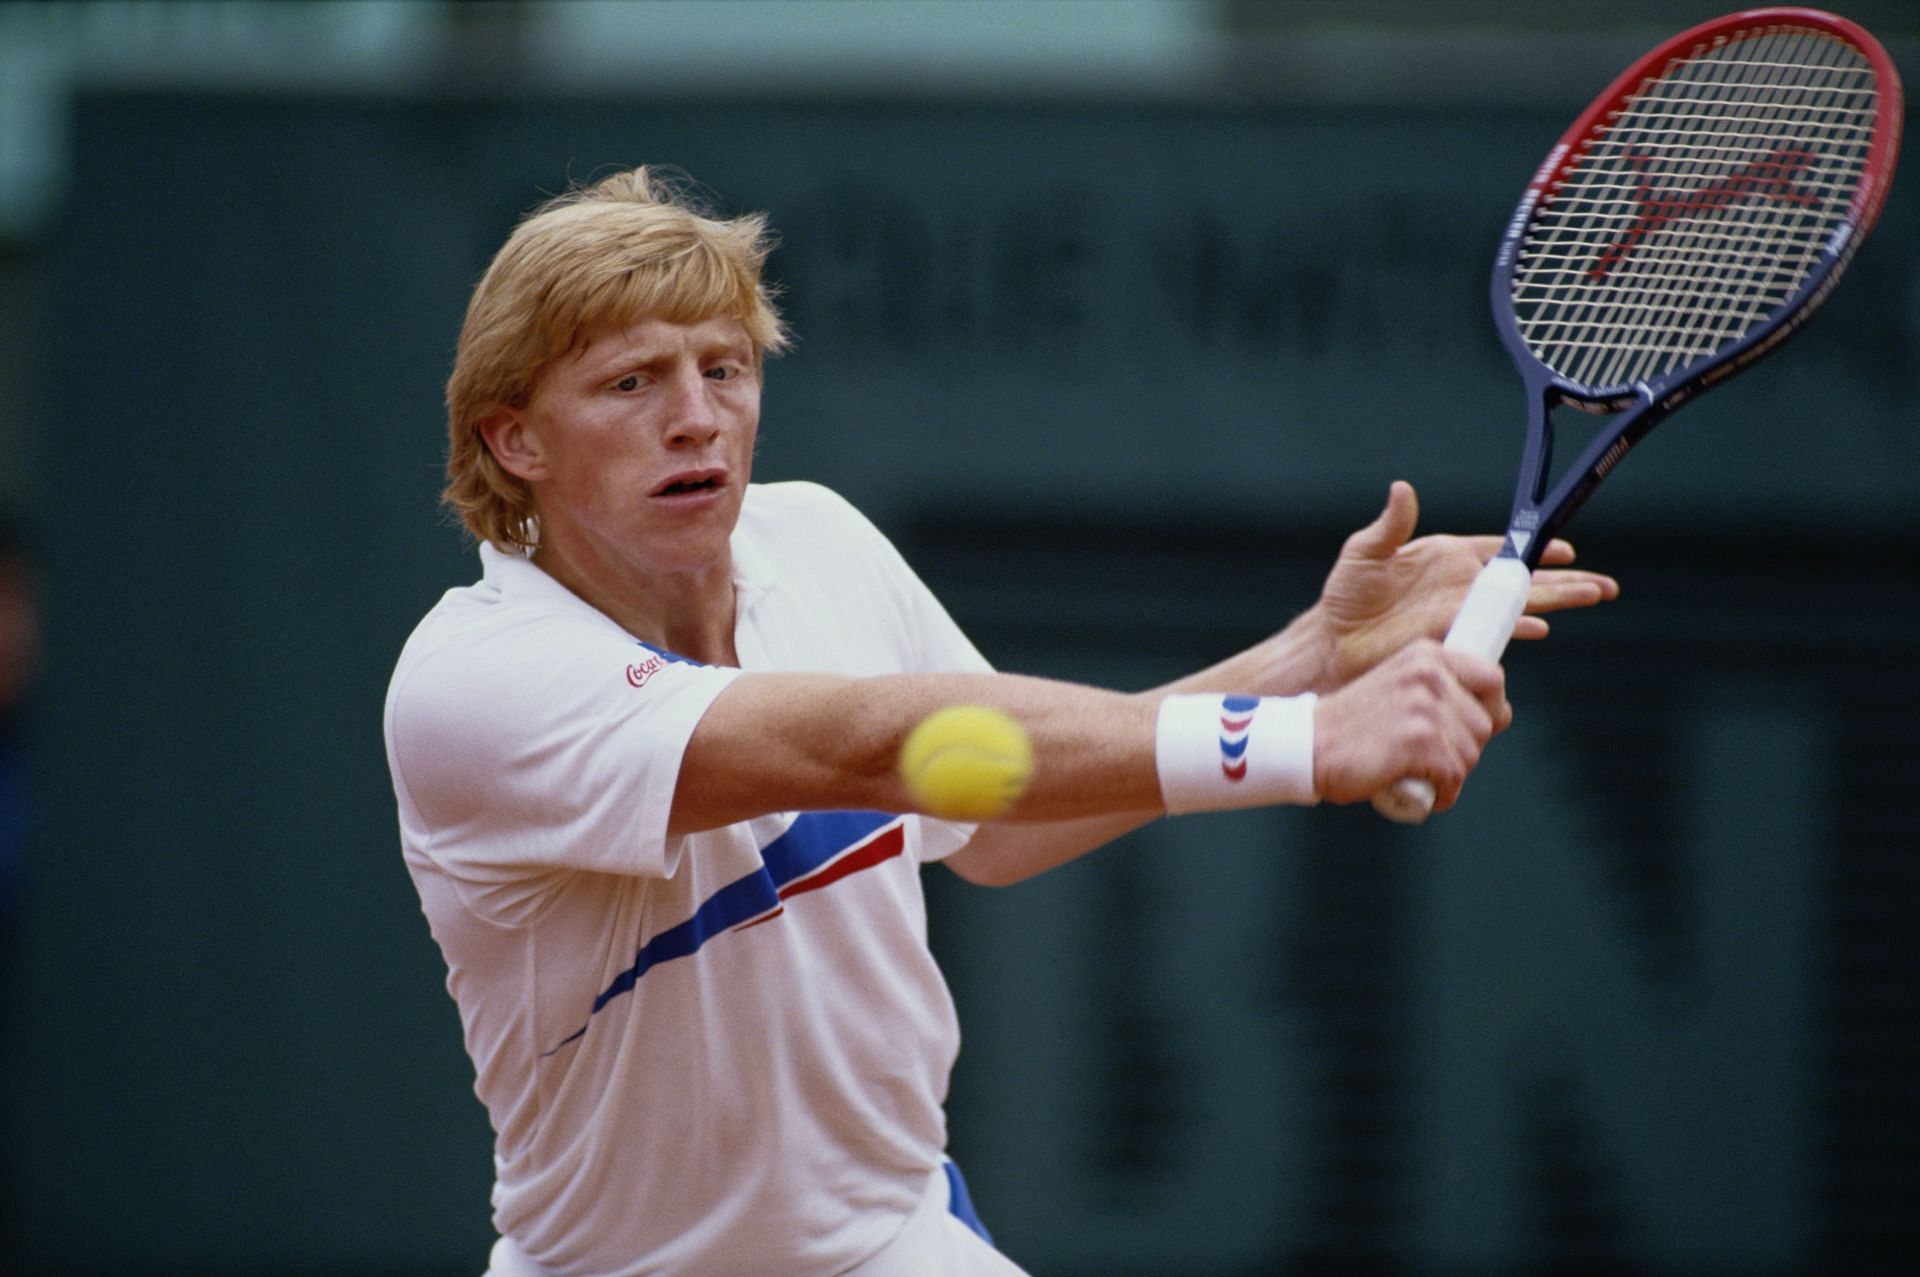 Boris Becker at the 1987 French Open